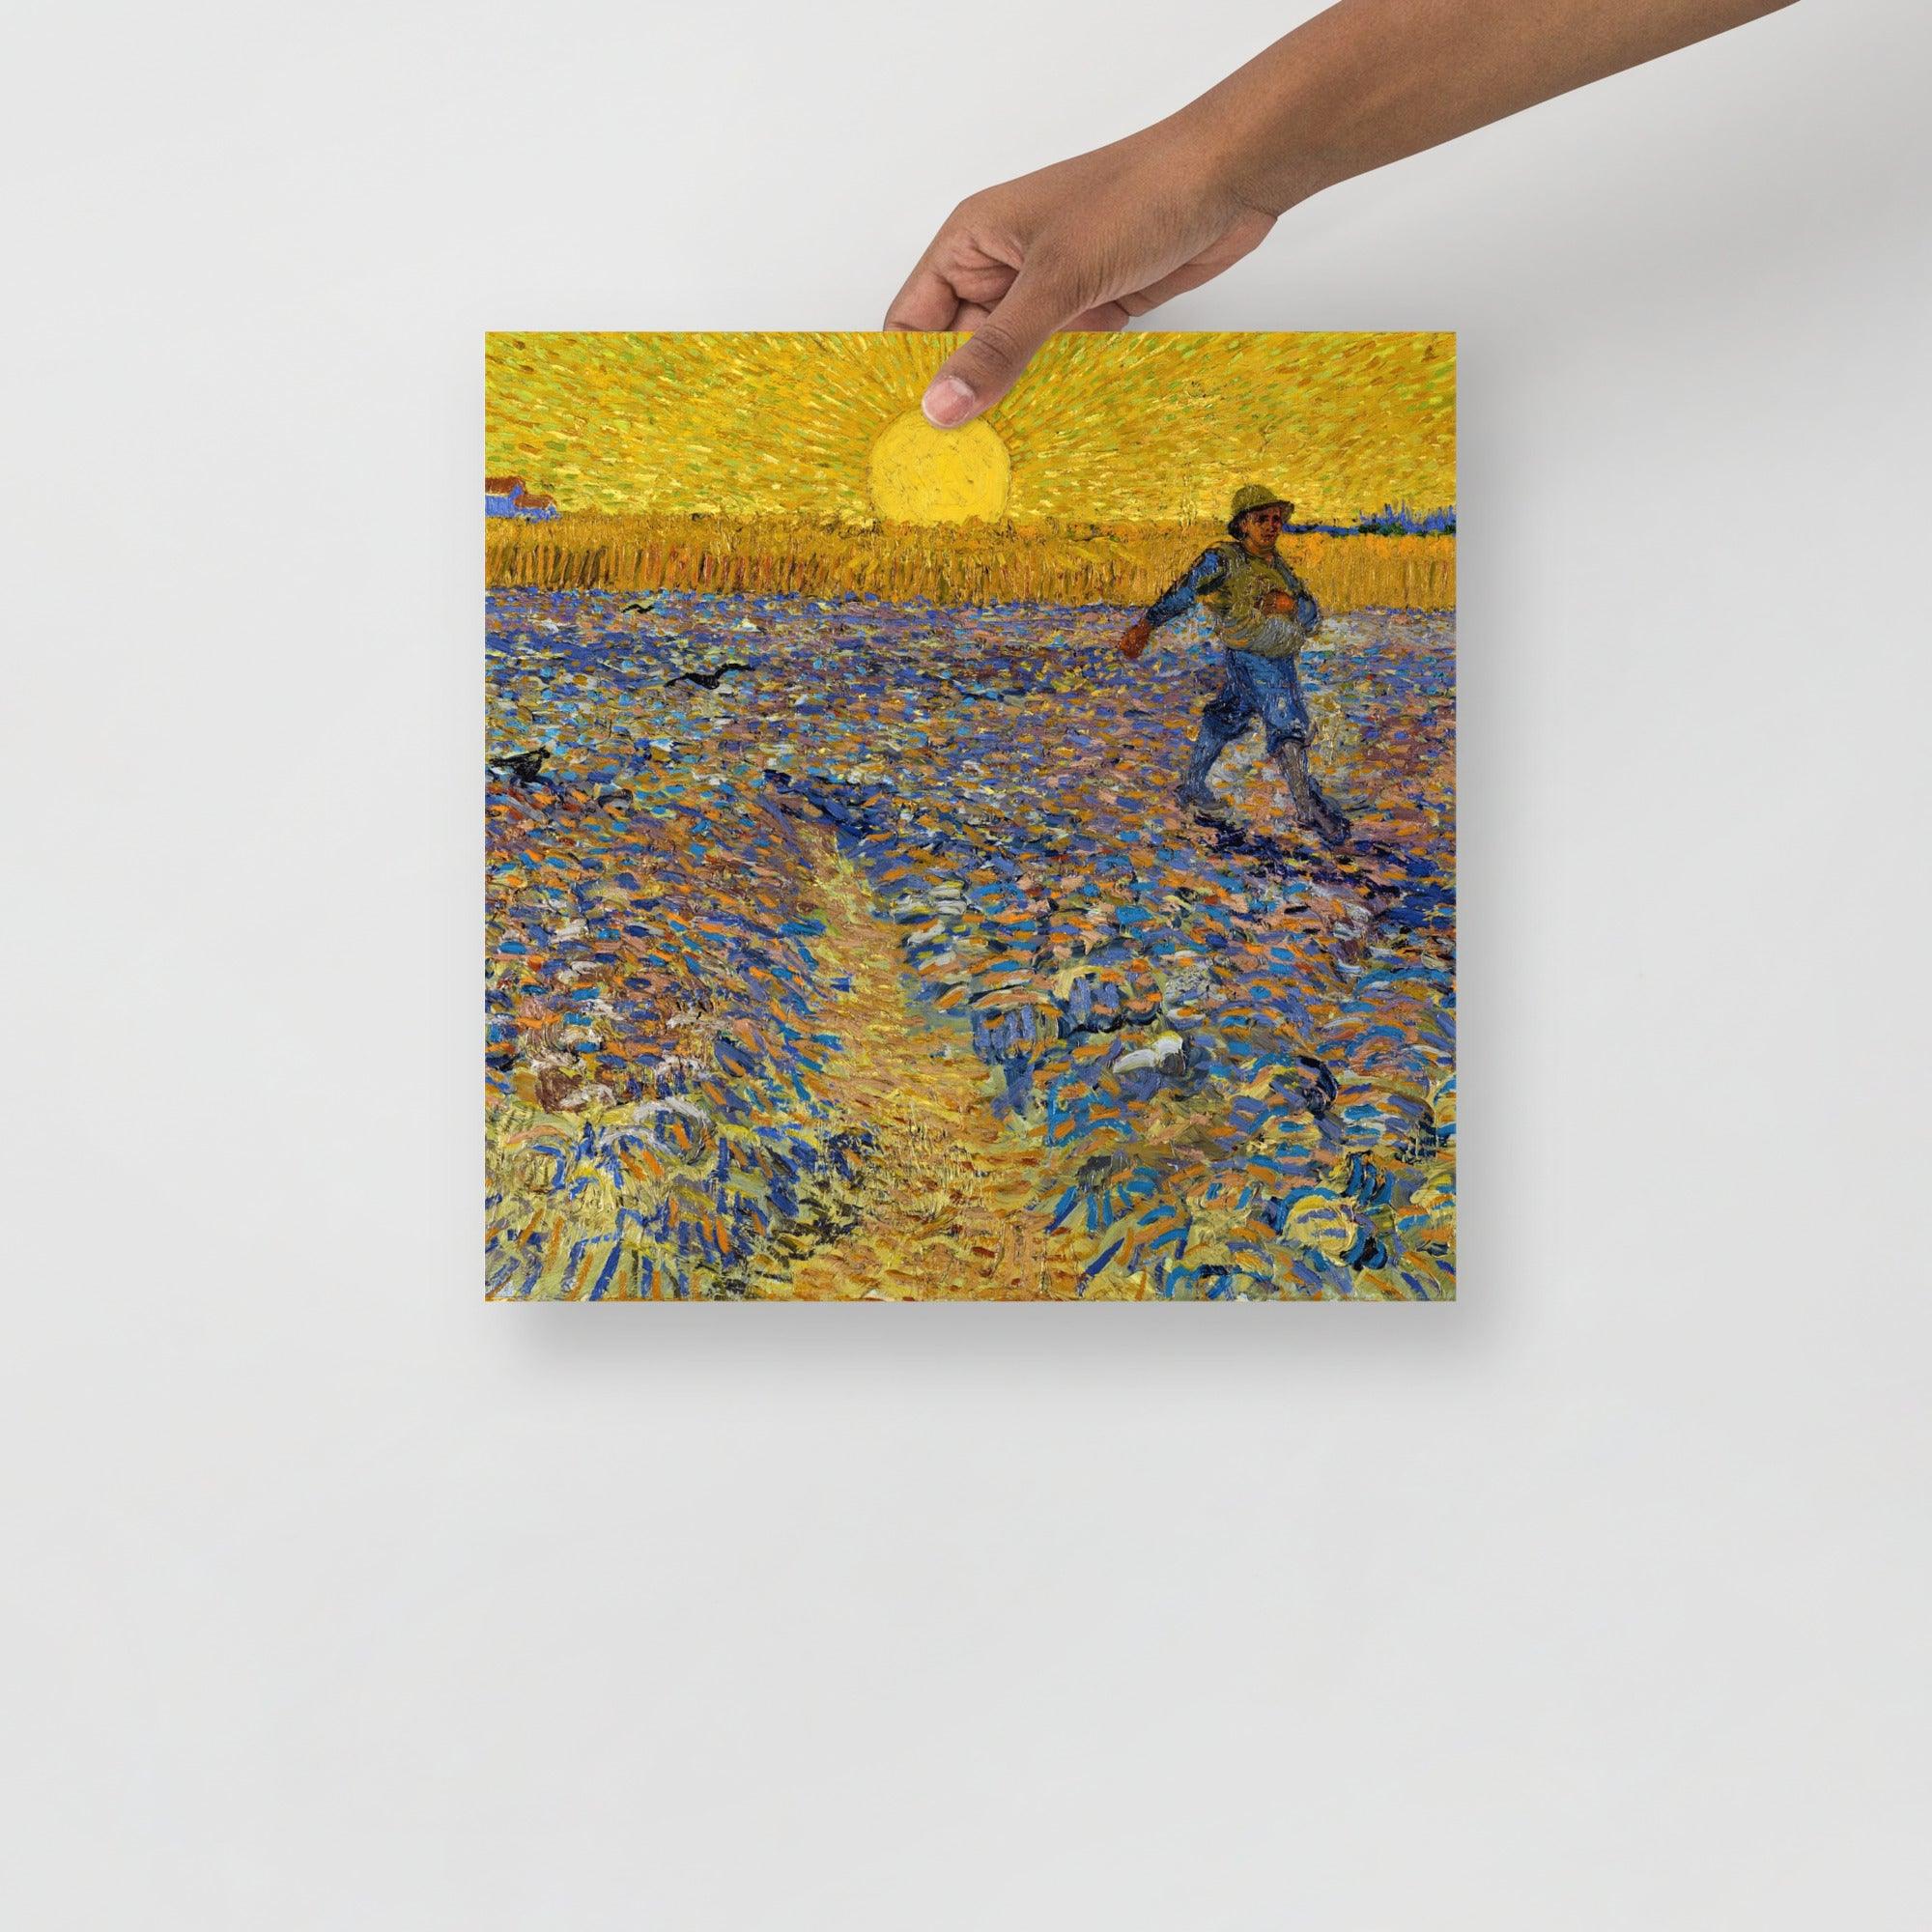 The Sower by Vincent Van Gogh poster on a plain backdrop in size14x14”.